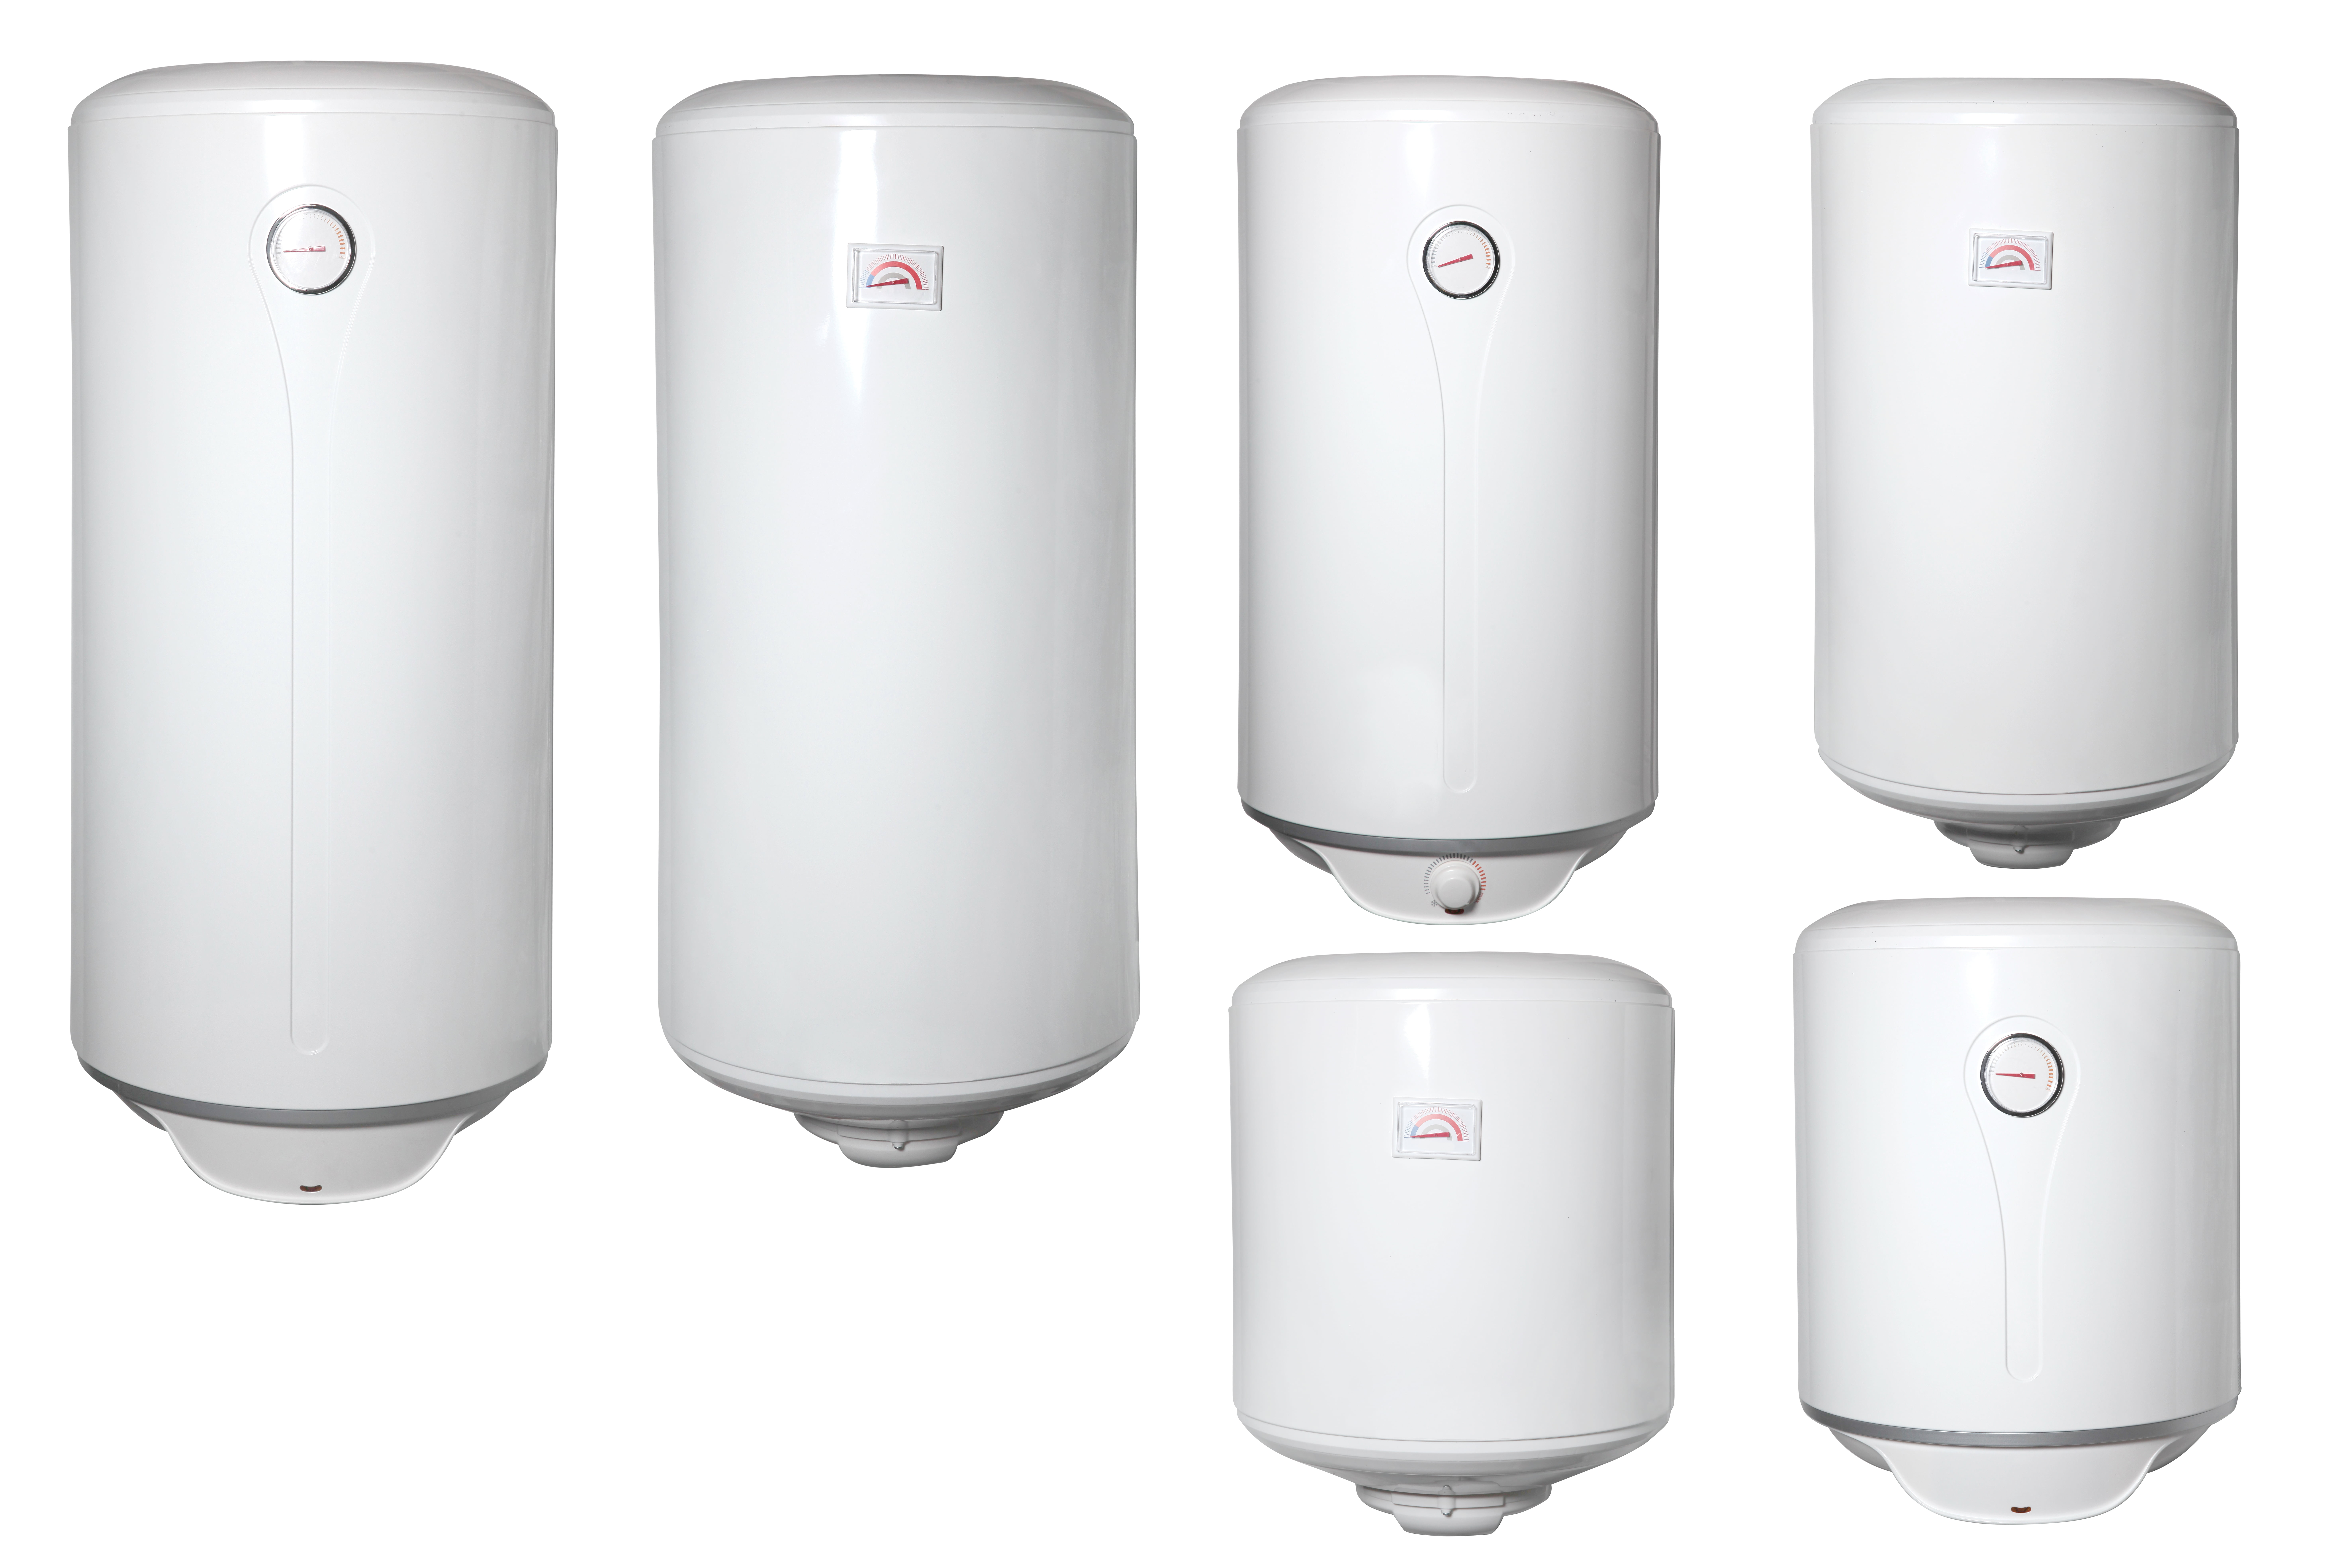 The Top 5 Brands for Electric Water Heaters in Hawaii